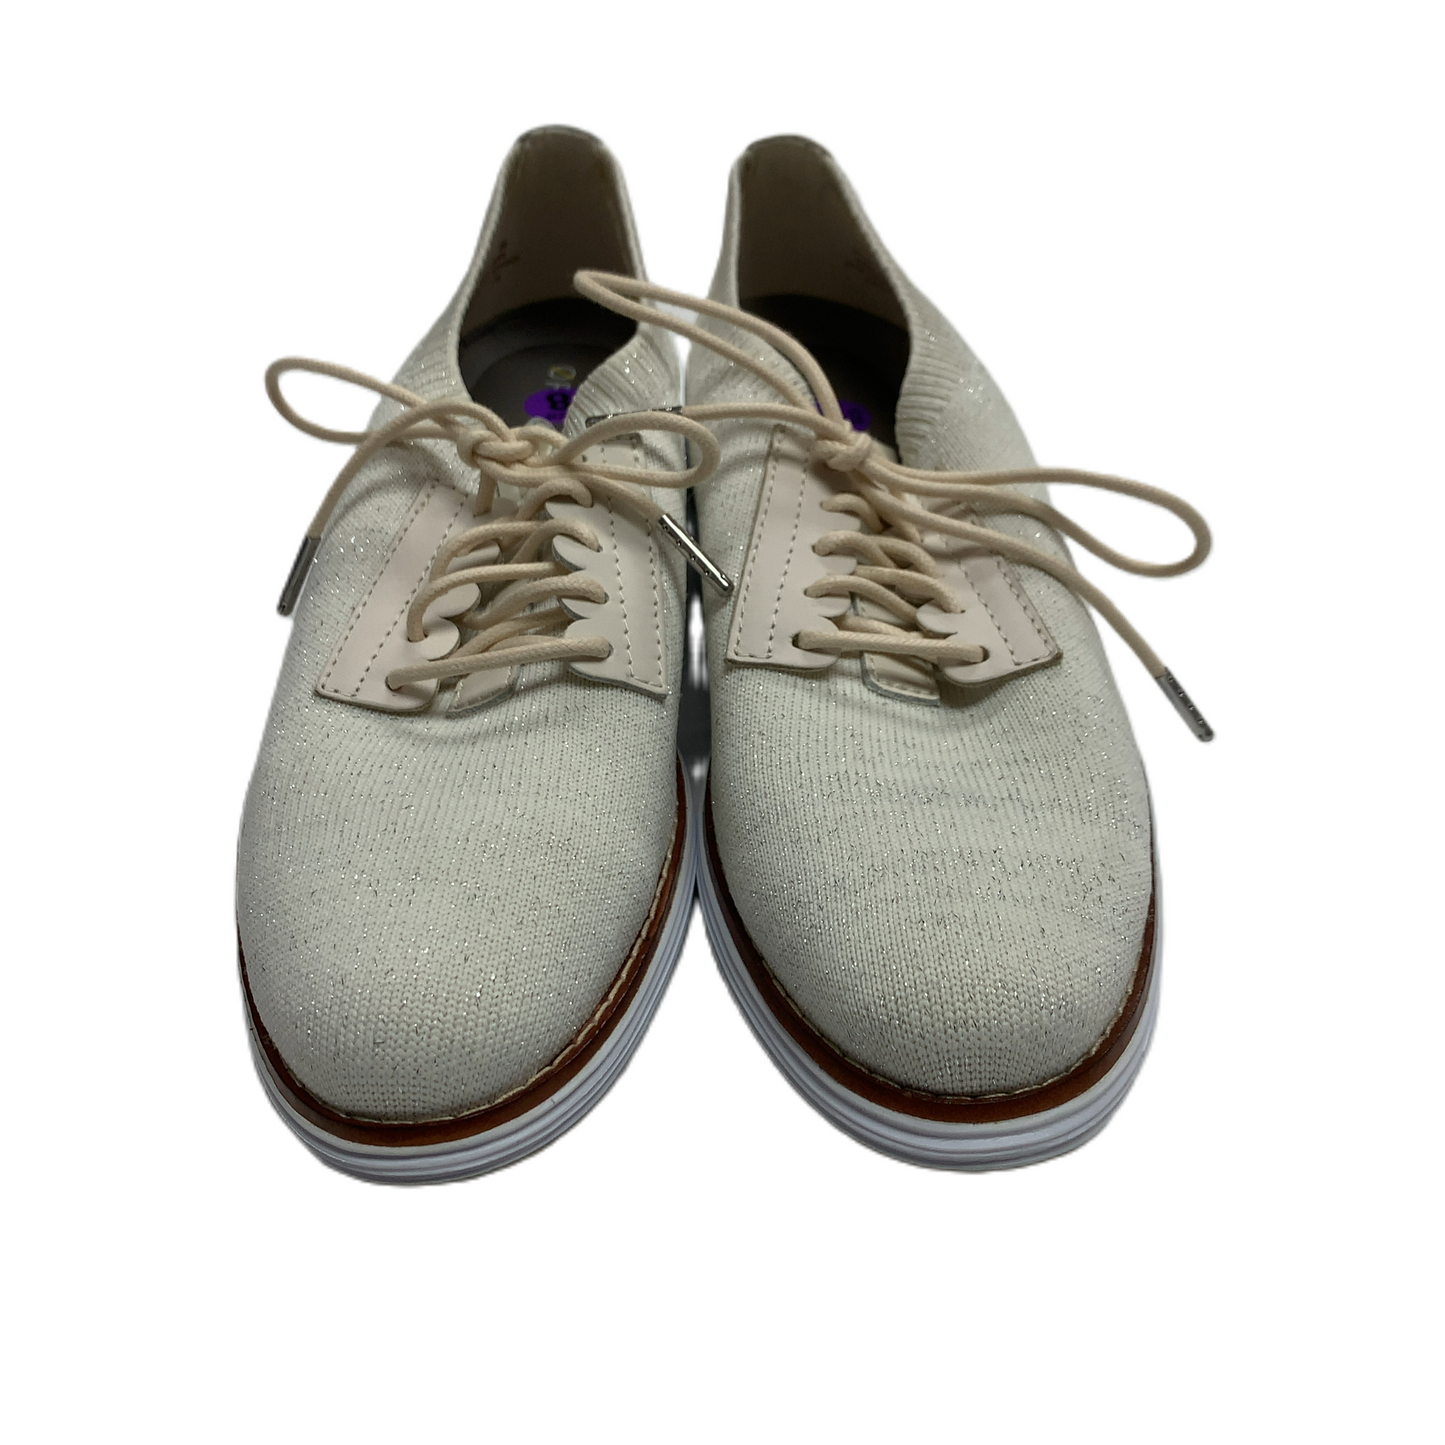 Shoes Sneakers By Cole-haan  Size: 8